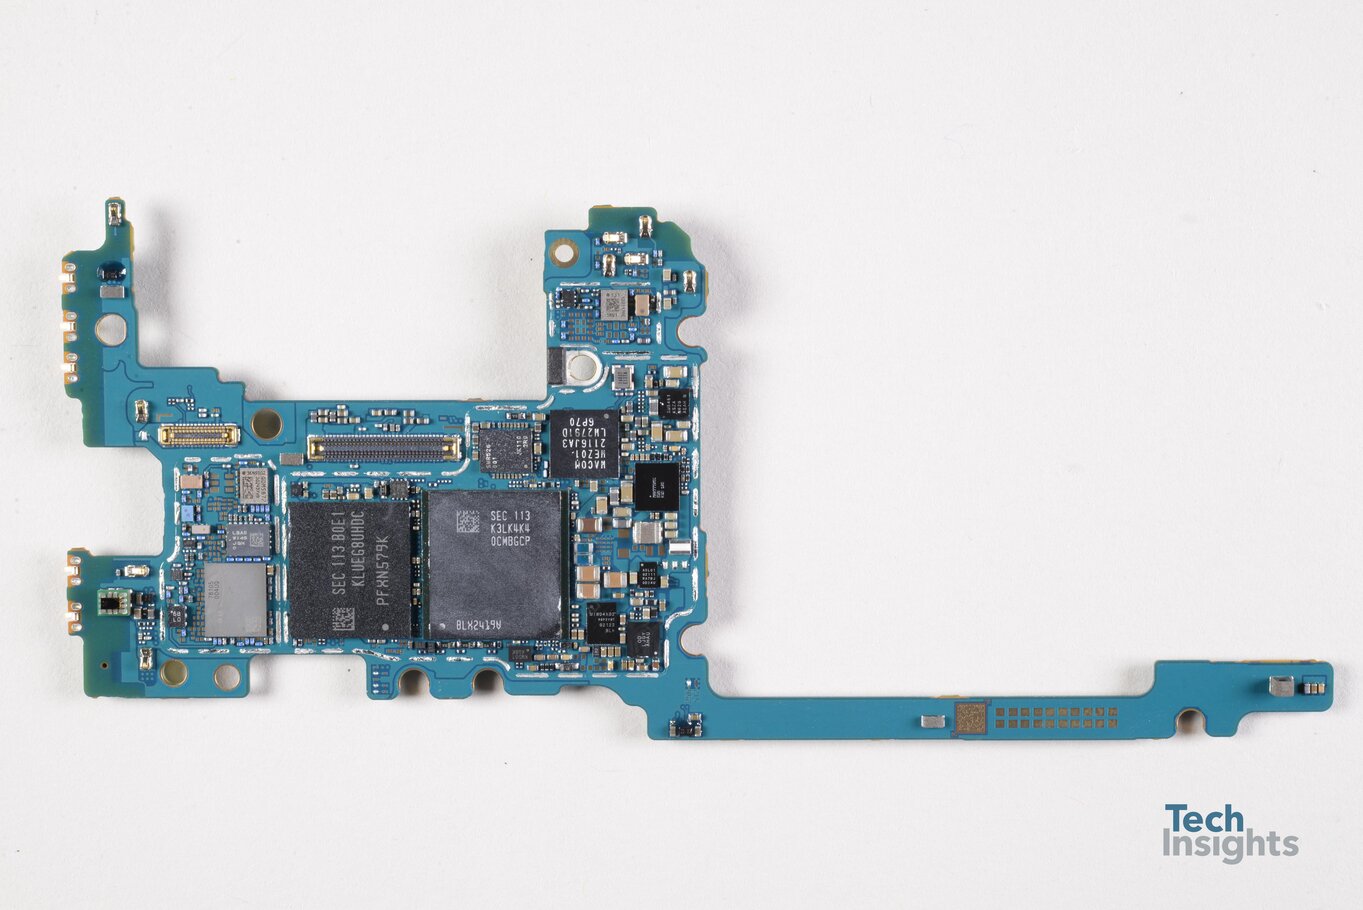 The main board inside the Galaxy Z Fold 5G includes the main applications processor from Qualcomm as well as the main memory from Samsung.